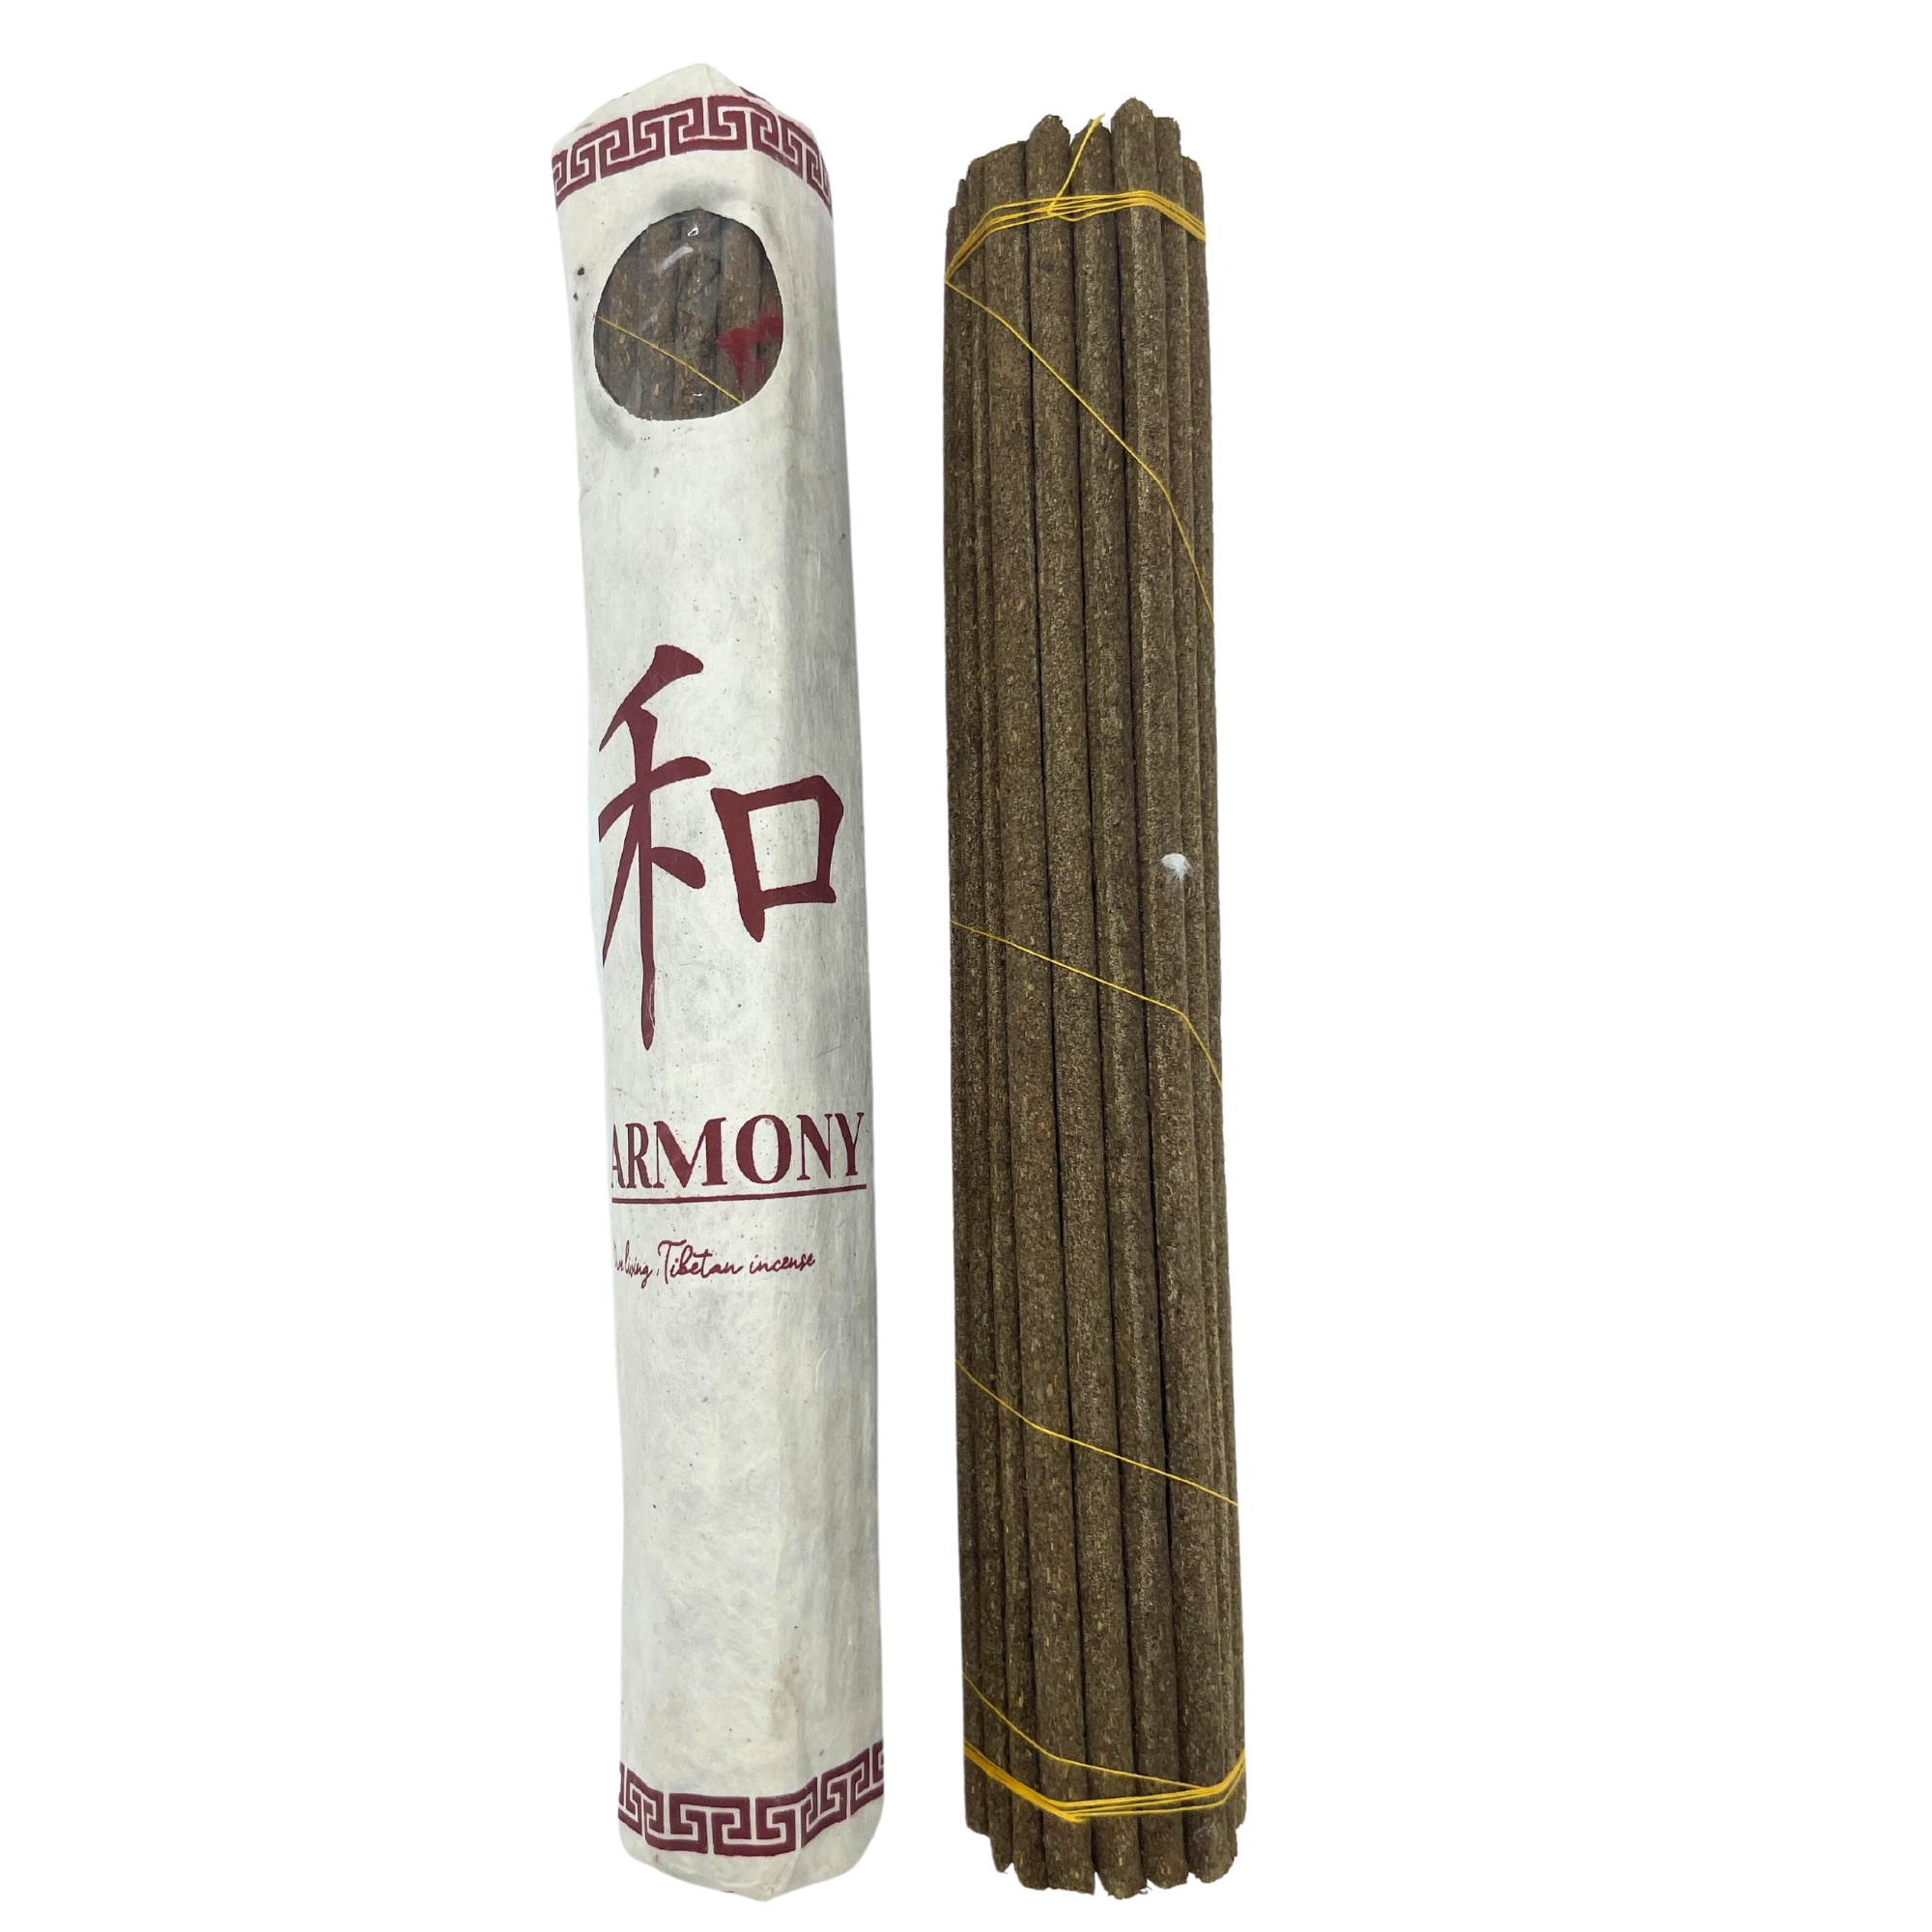 Rolled Pack of 30 Premium Tibetan Incense - Harmony - Click Image to Close